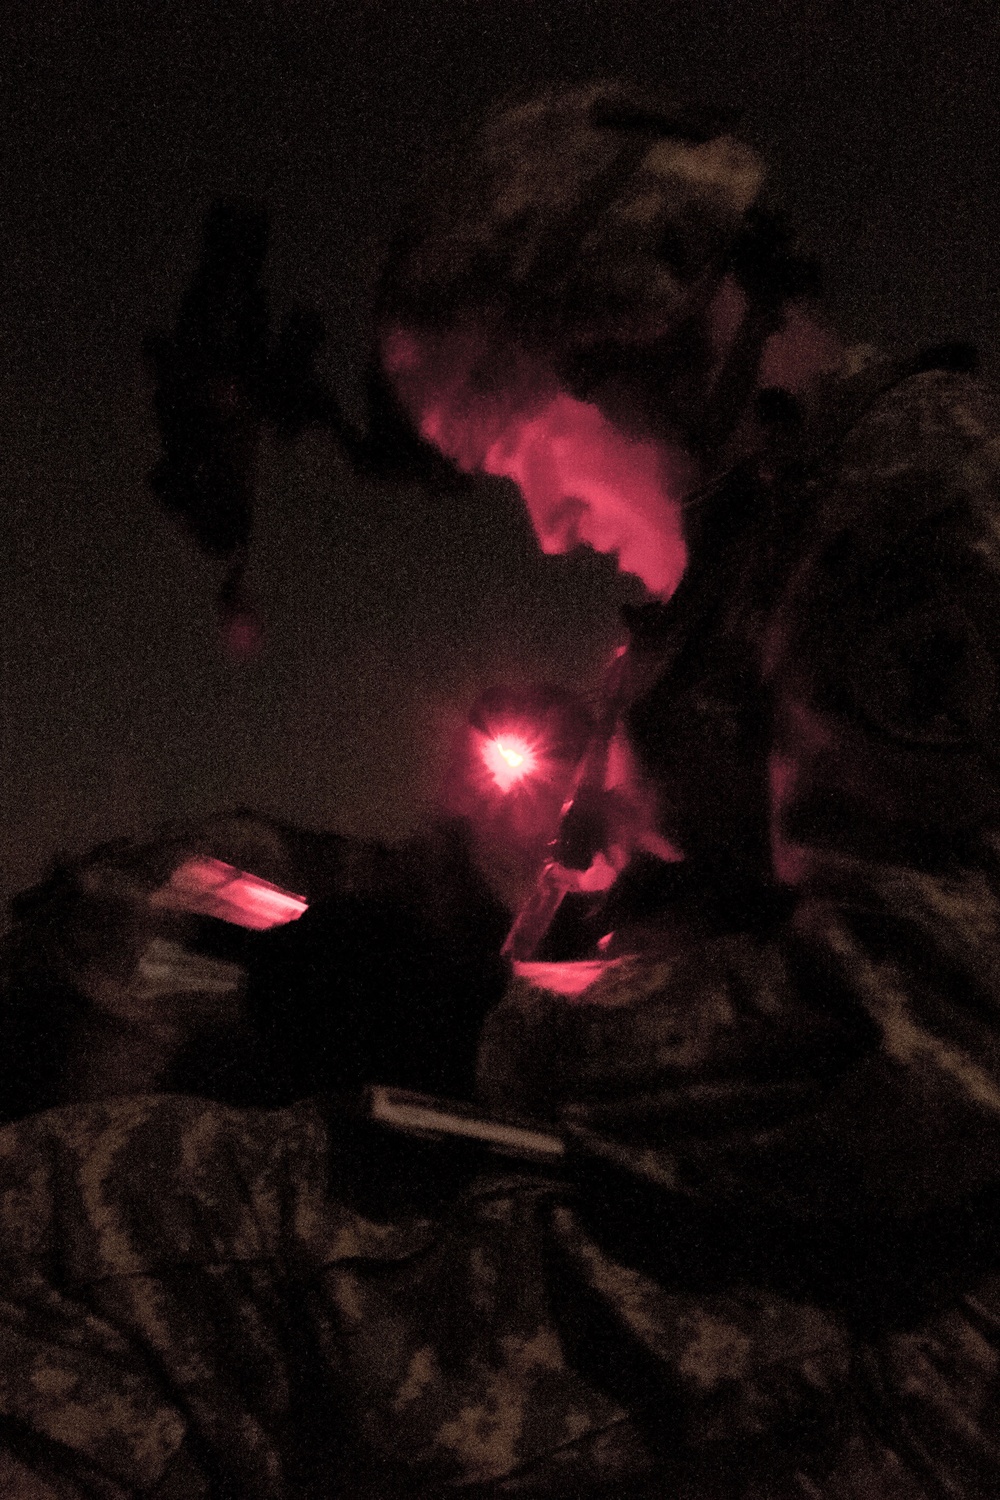 Paratrooper checks map to determine objective point